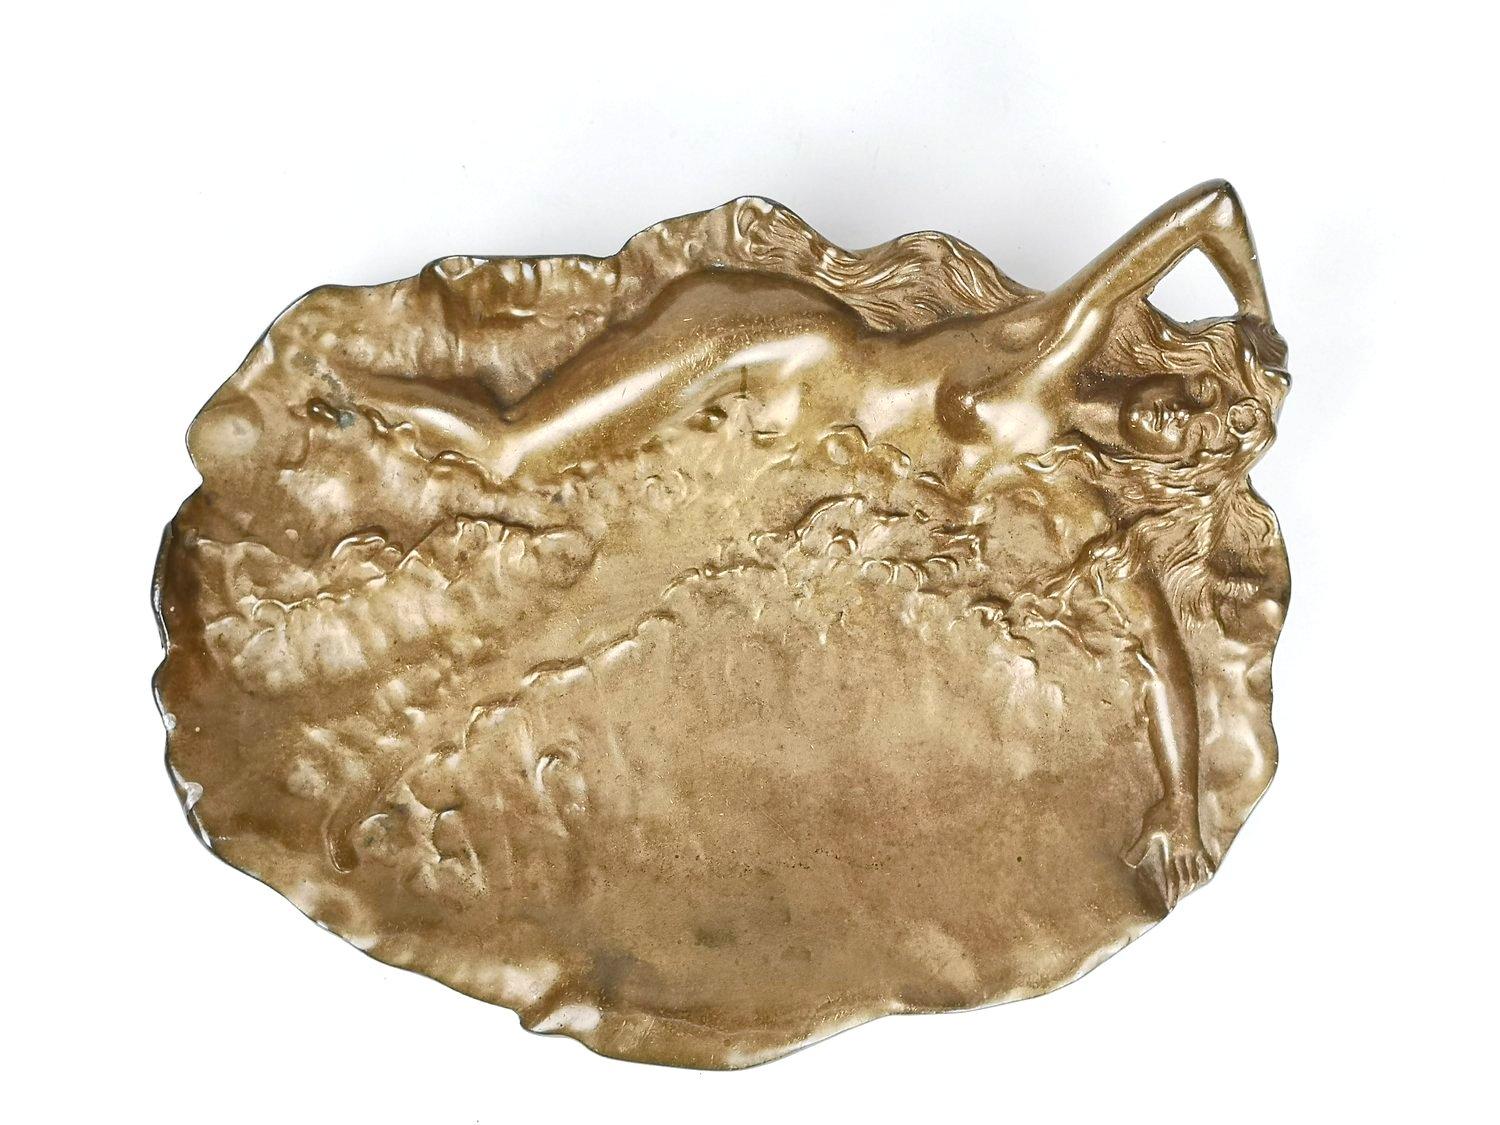 A very decorative bronze name card holder, but may also function as an cigar ashtray.